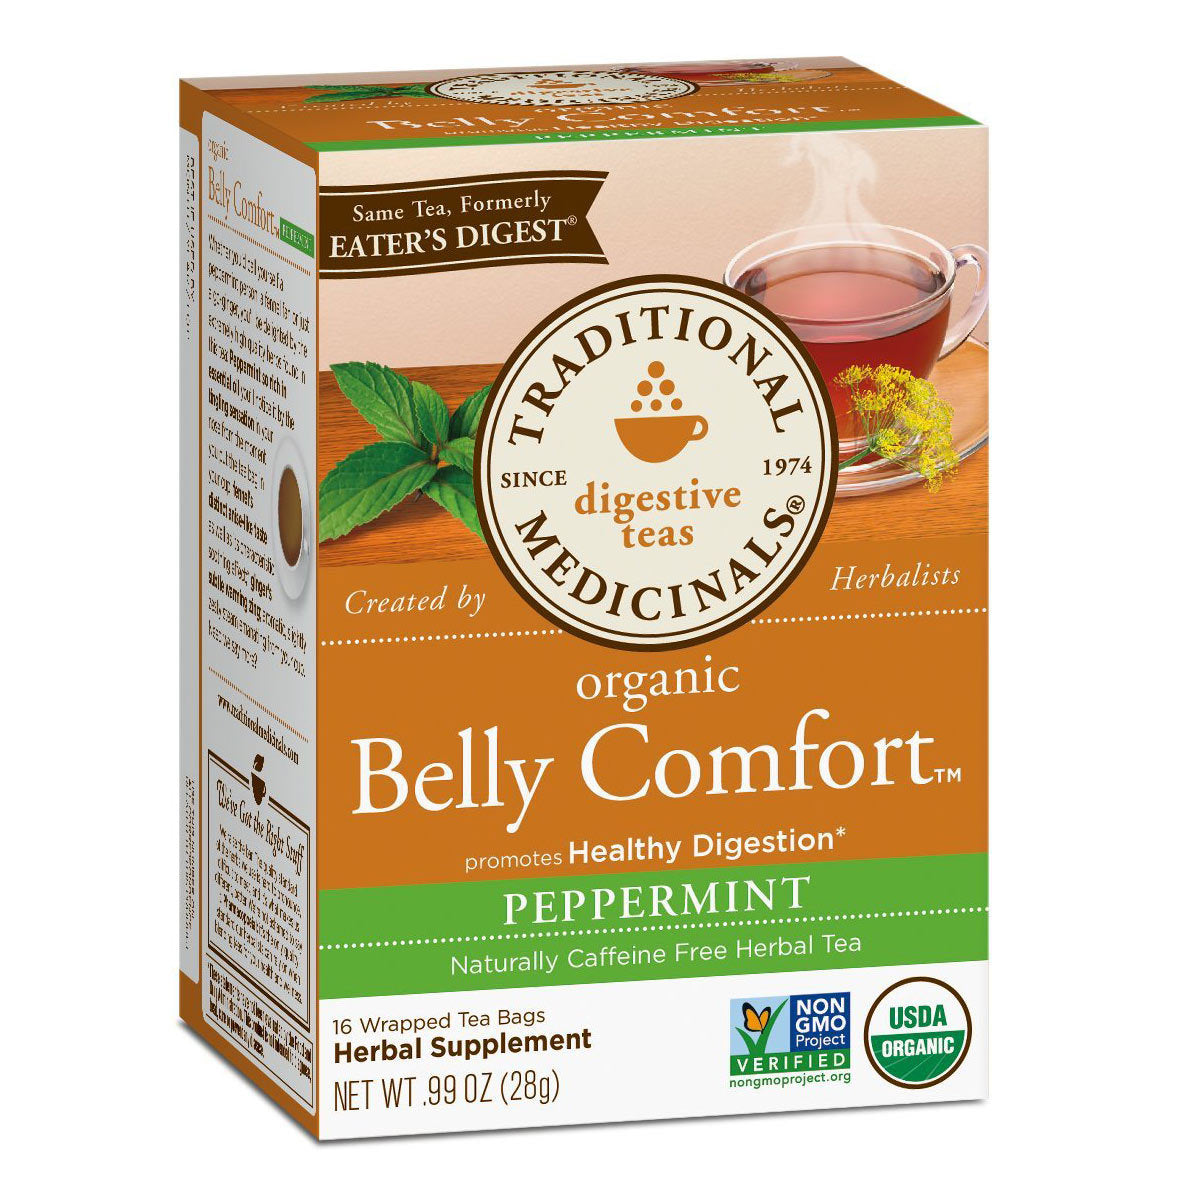 Primary image of Belly Comfort Peppermint 